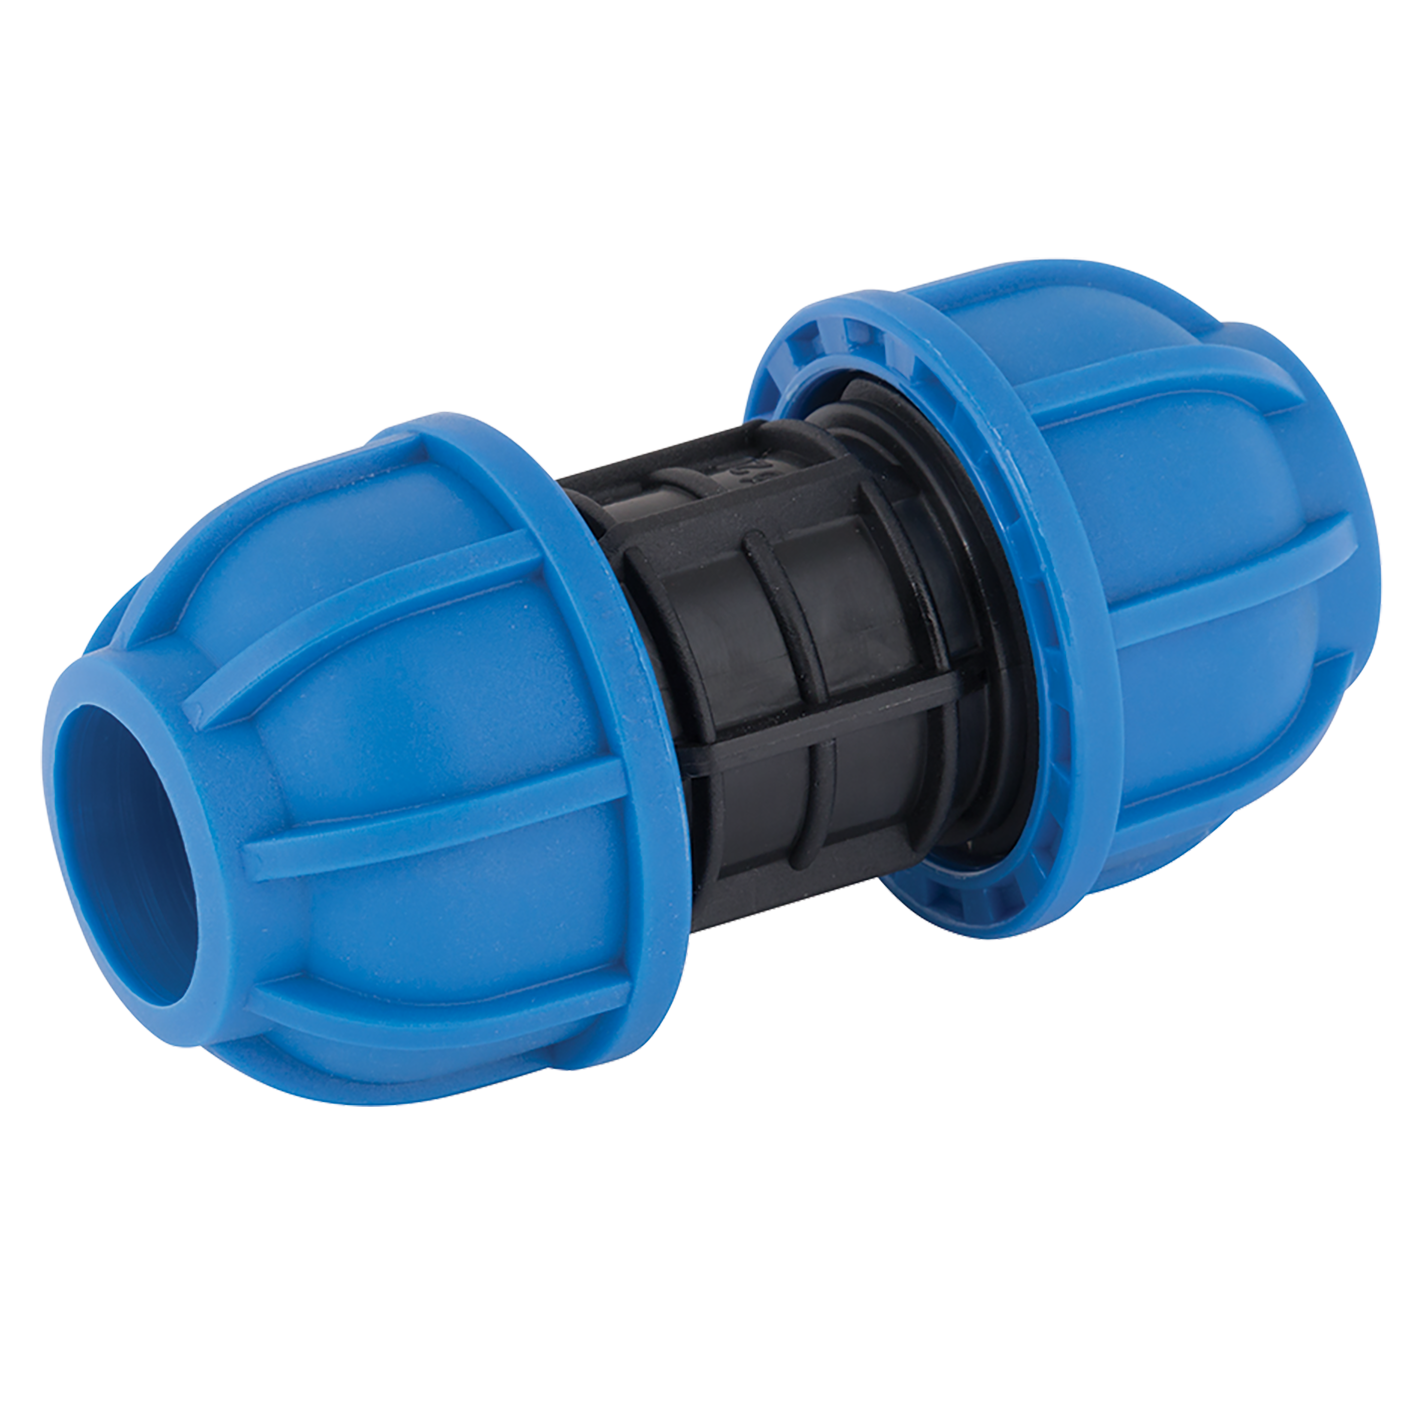 25MM PLASTIC EQUAL STRAIGHTAIGHT CONNECTOR